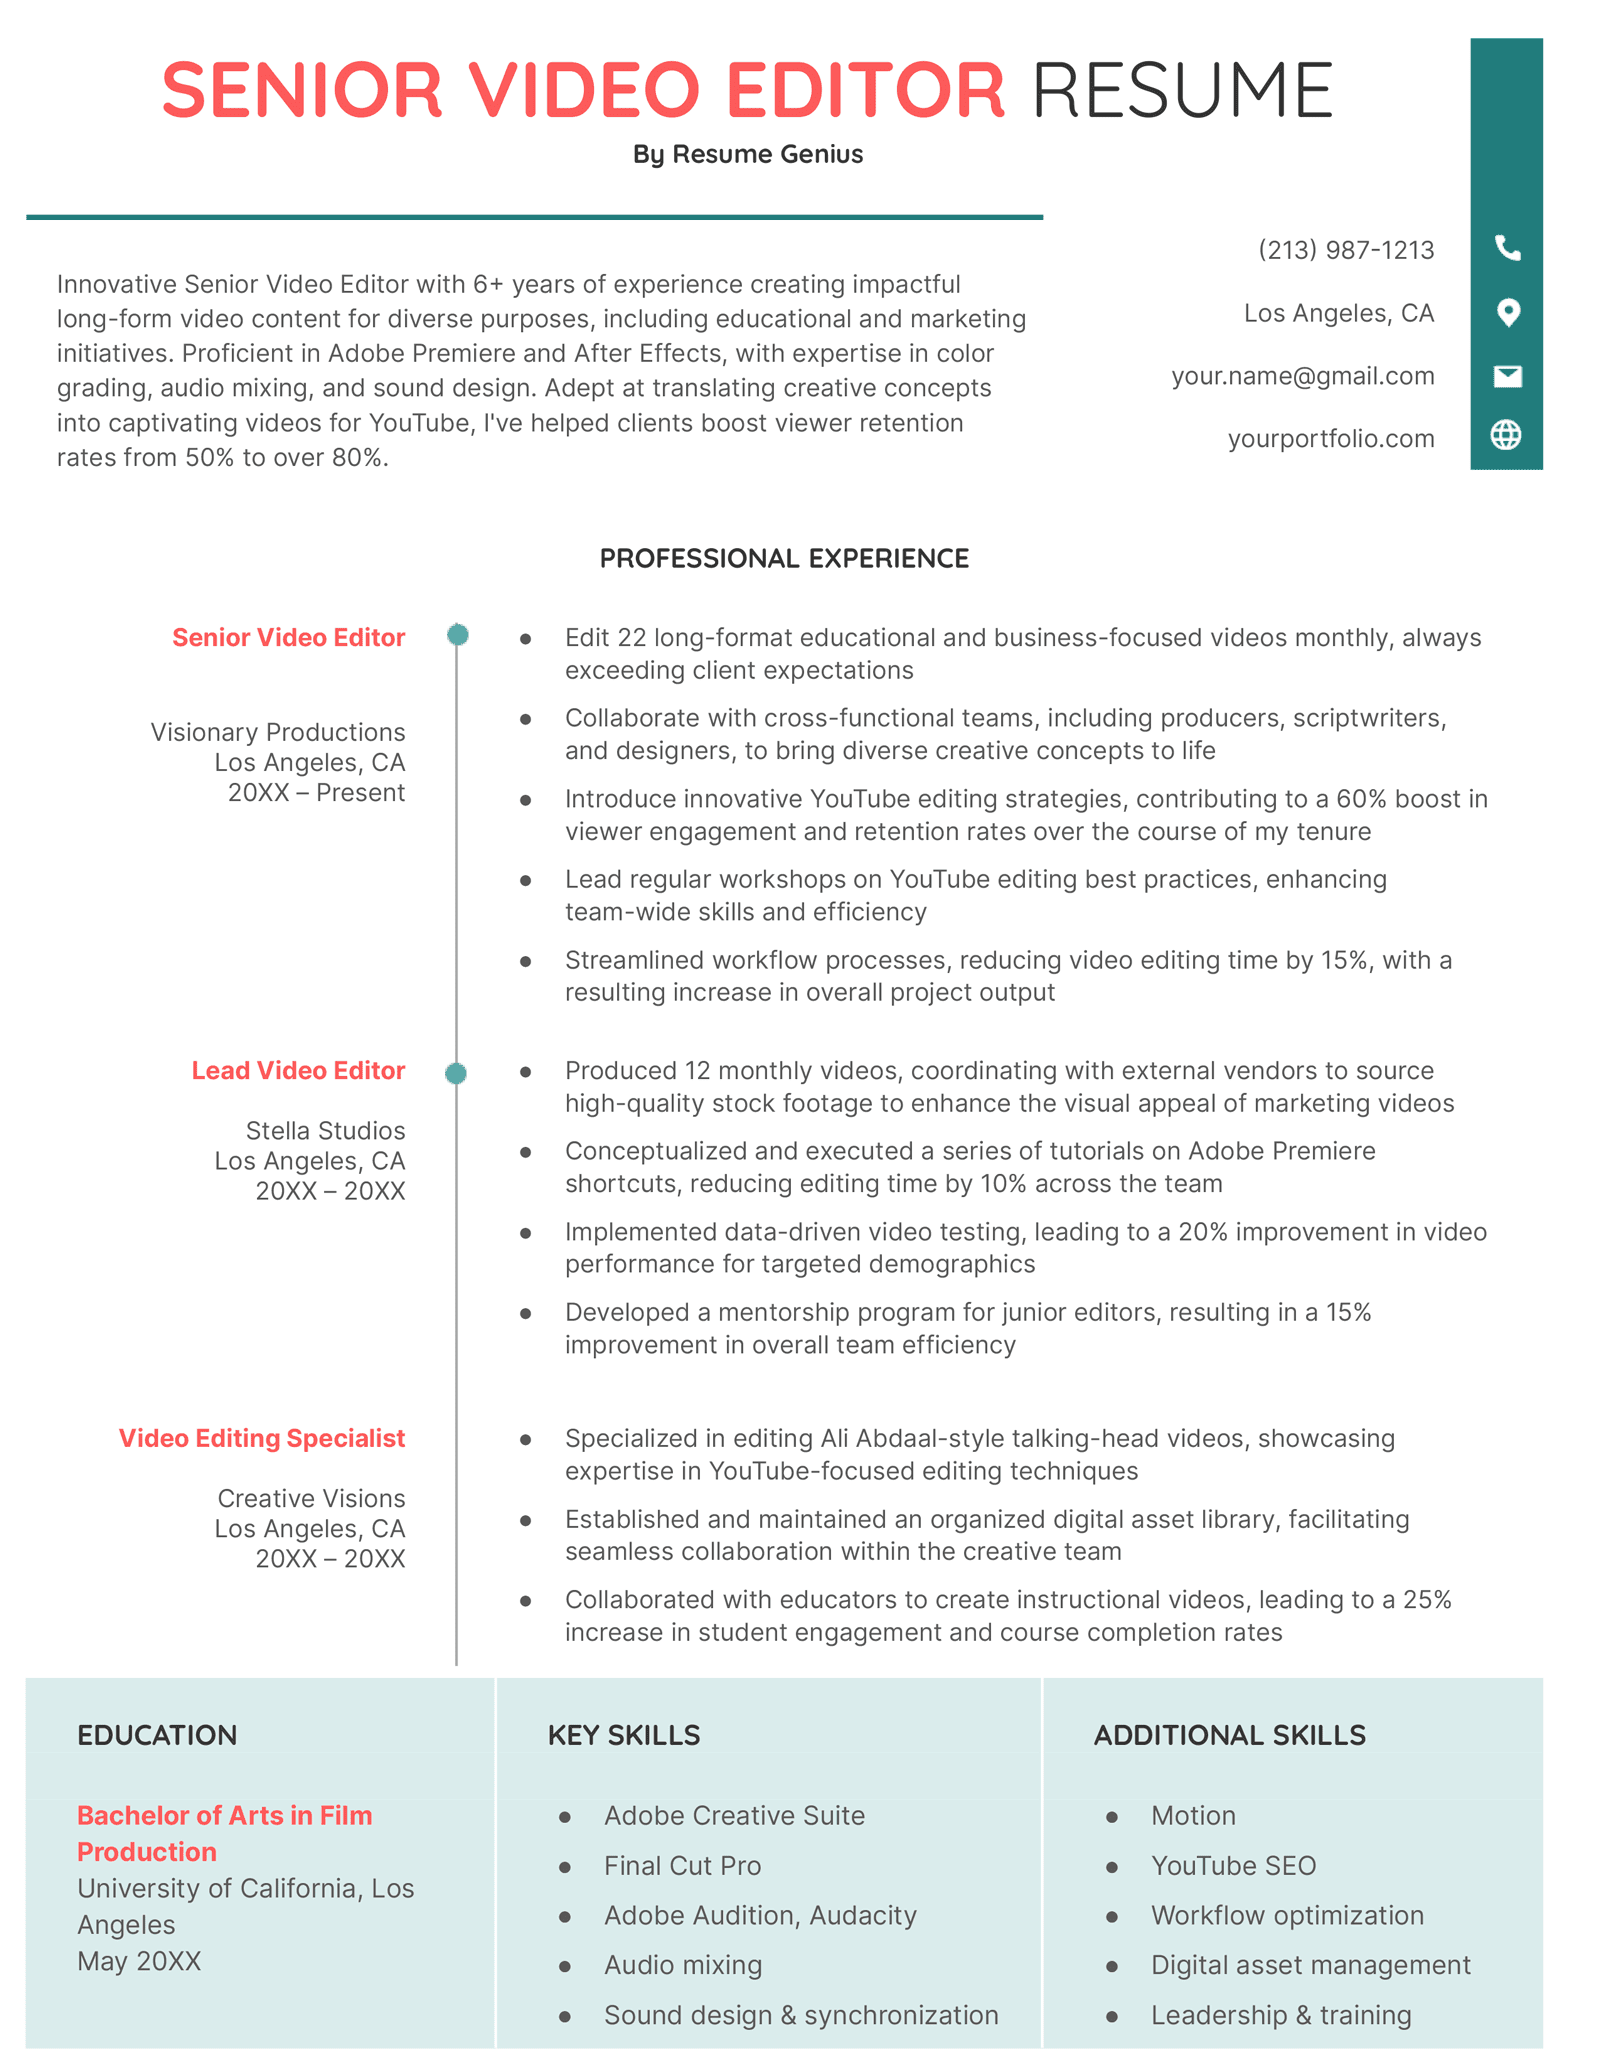 Senior video editor resume example using the Cute template in green.